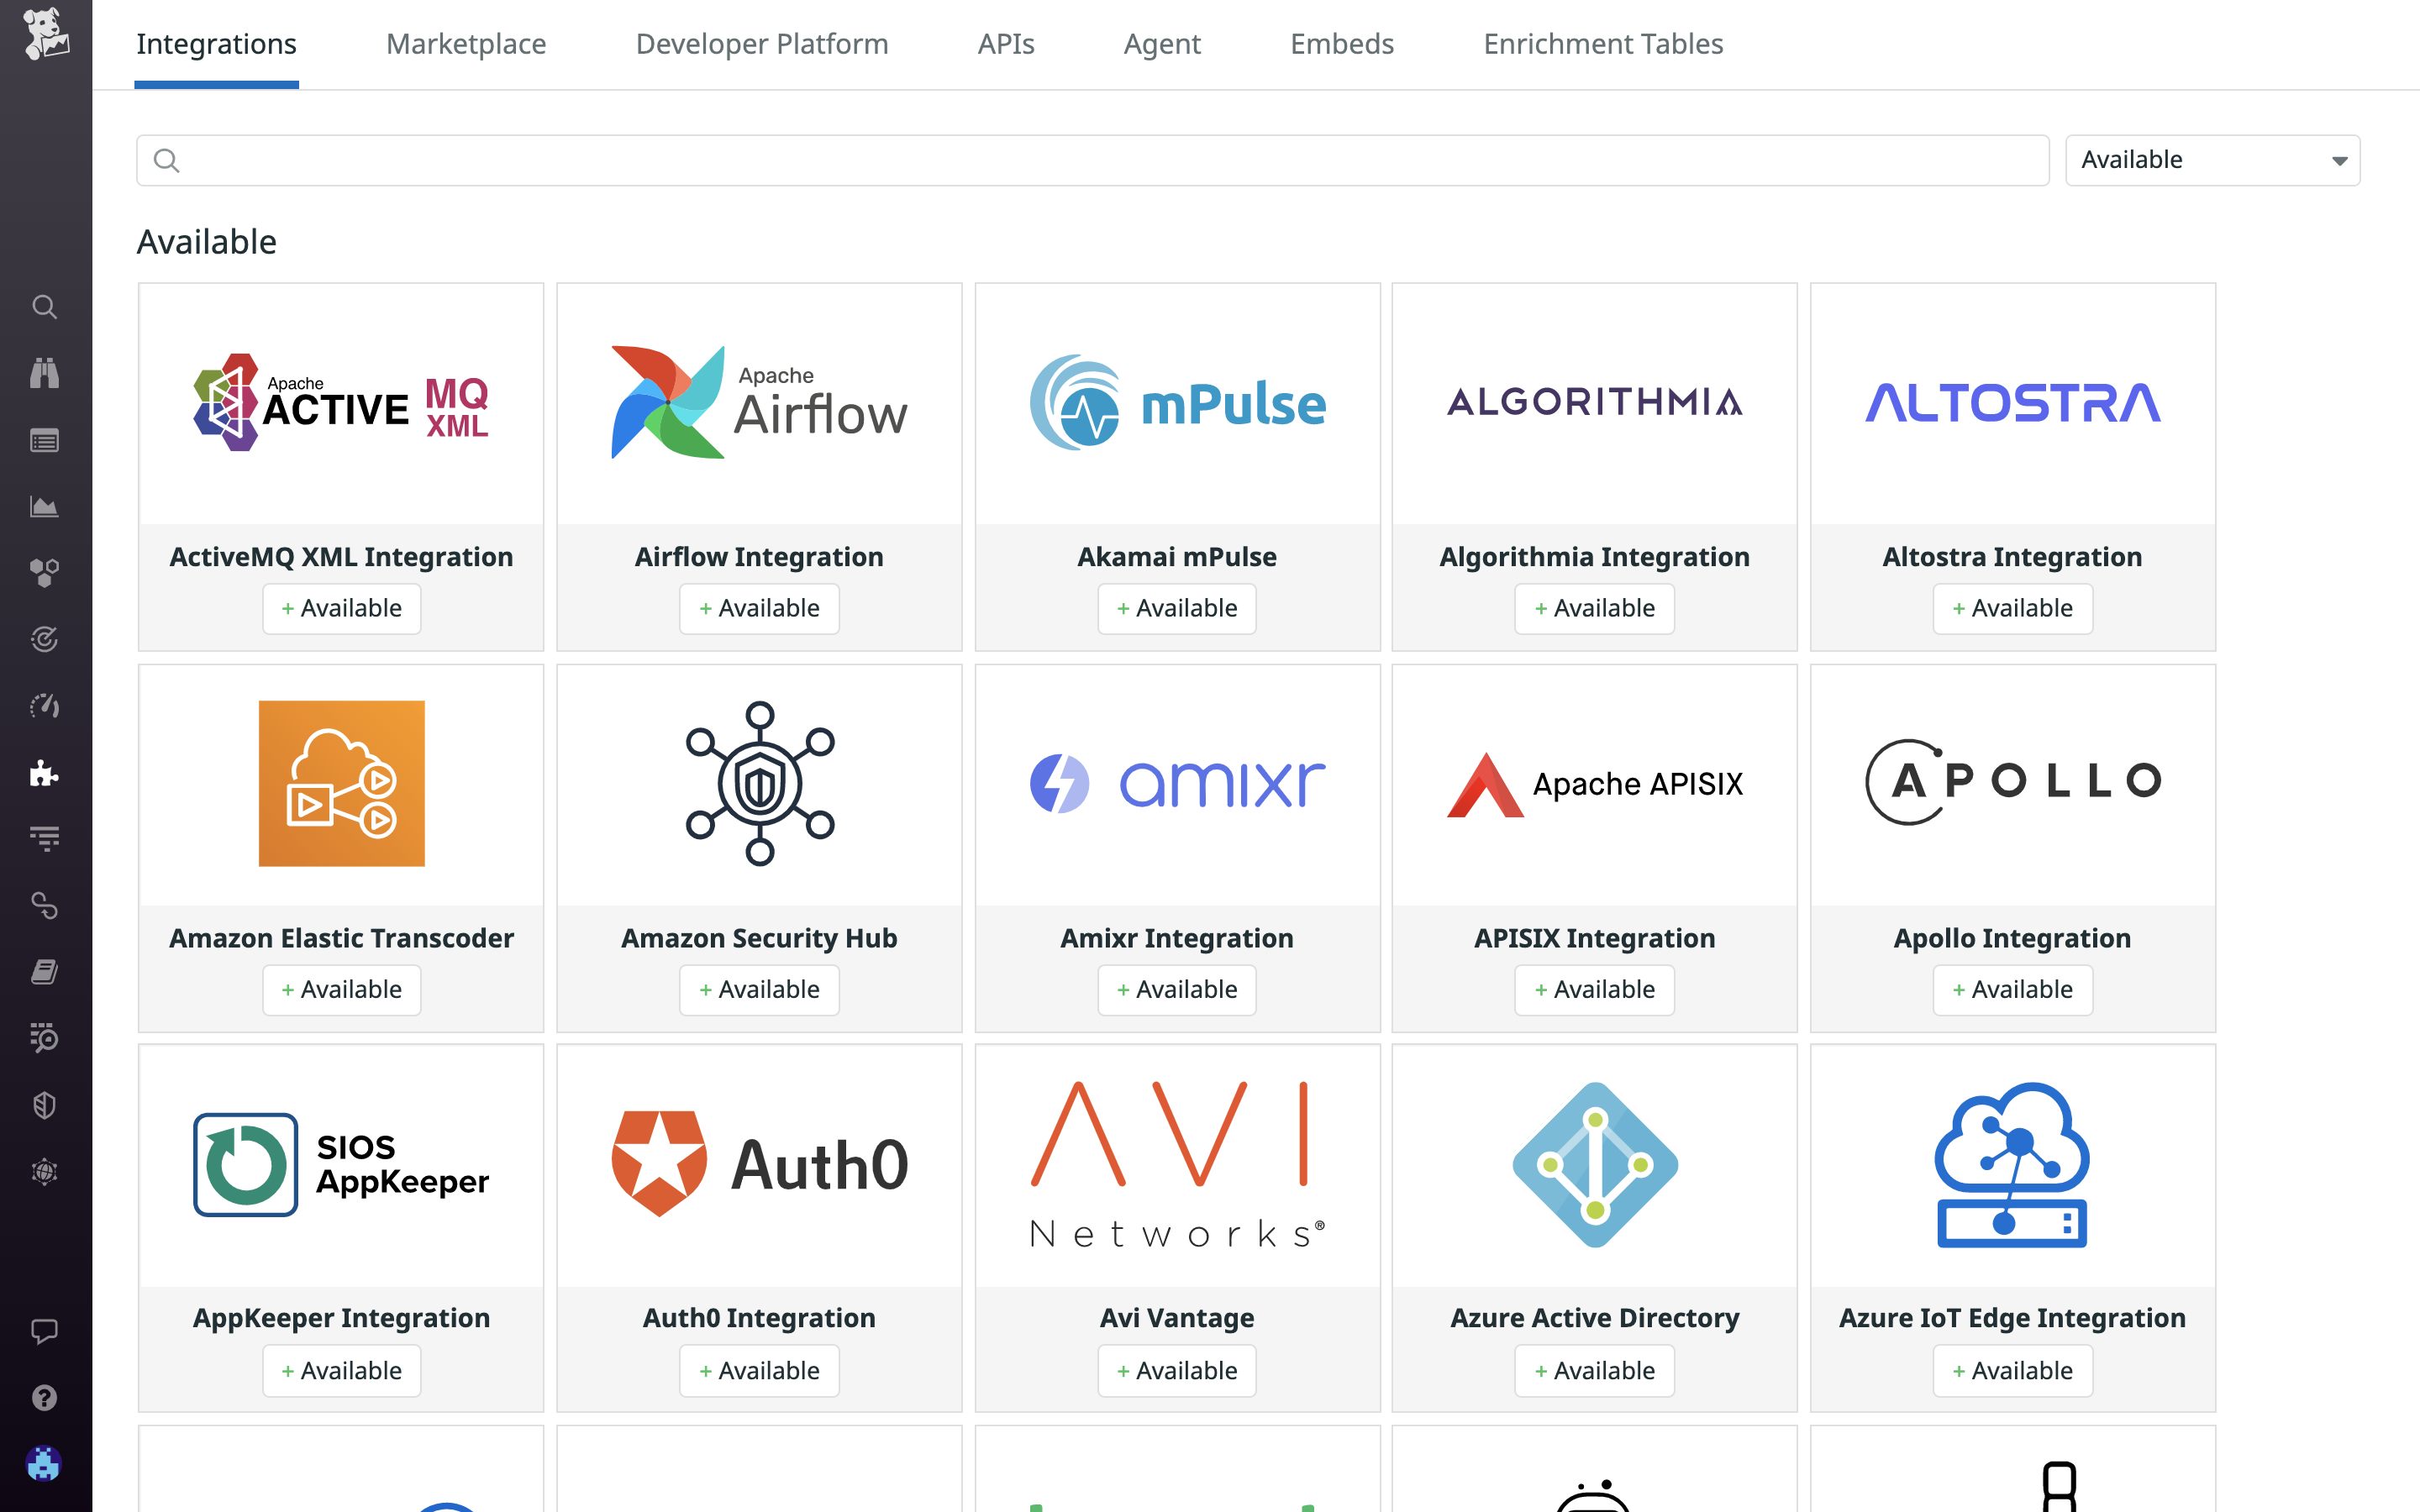 Datadog integrates with the most popular technologies to help secure your entire stack.